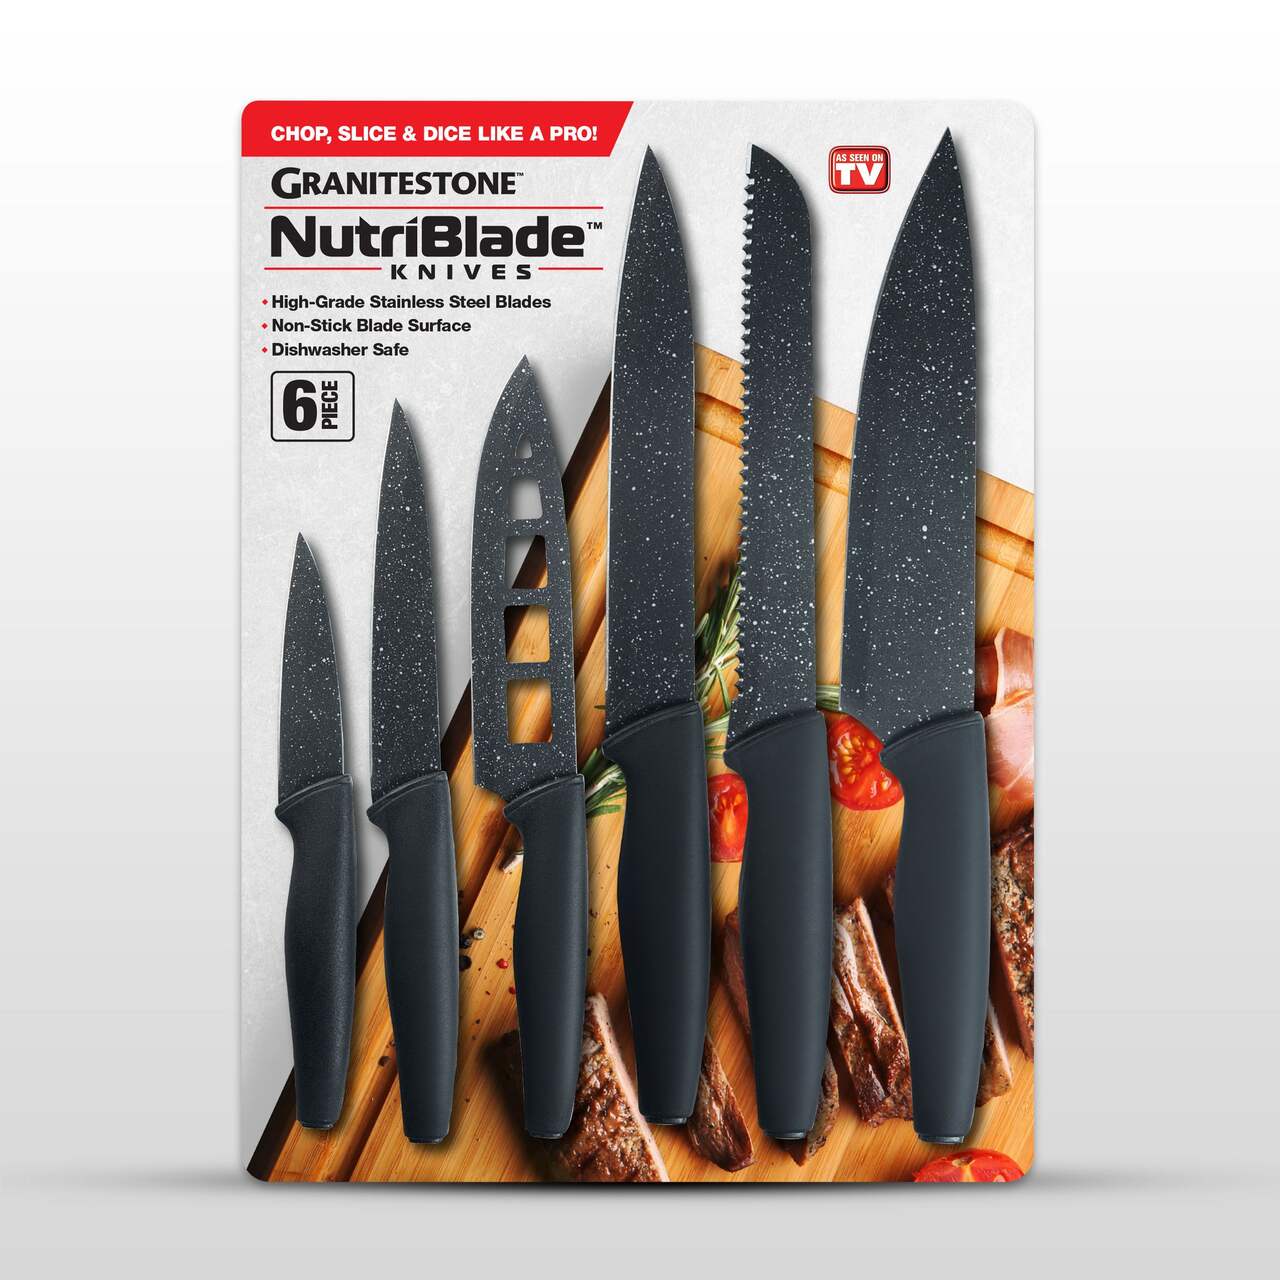 https://media-www.canadiantire.ca/product/living/as-seen-on-tv/asotv/3997611/as-seen-on-tv-magma-steel-knife-set-363e20a0-1c41-4fd0-a852-209298665183-jpgrendition.jpg?imdensity=1&imwidth=1244&impolicy=mZoom